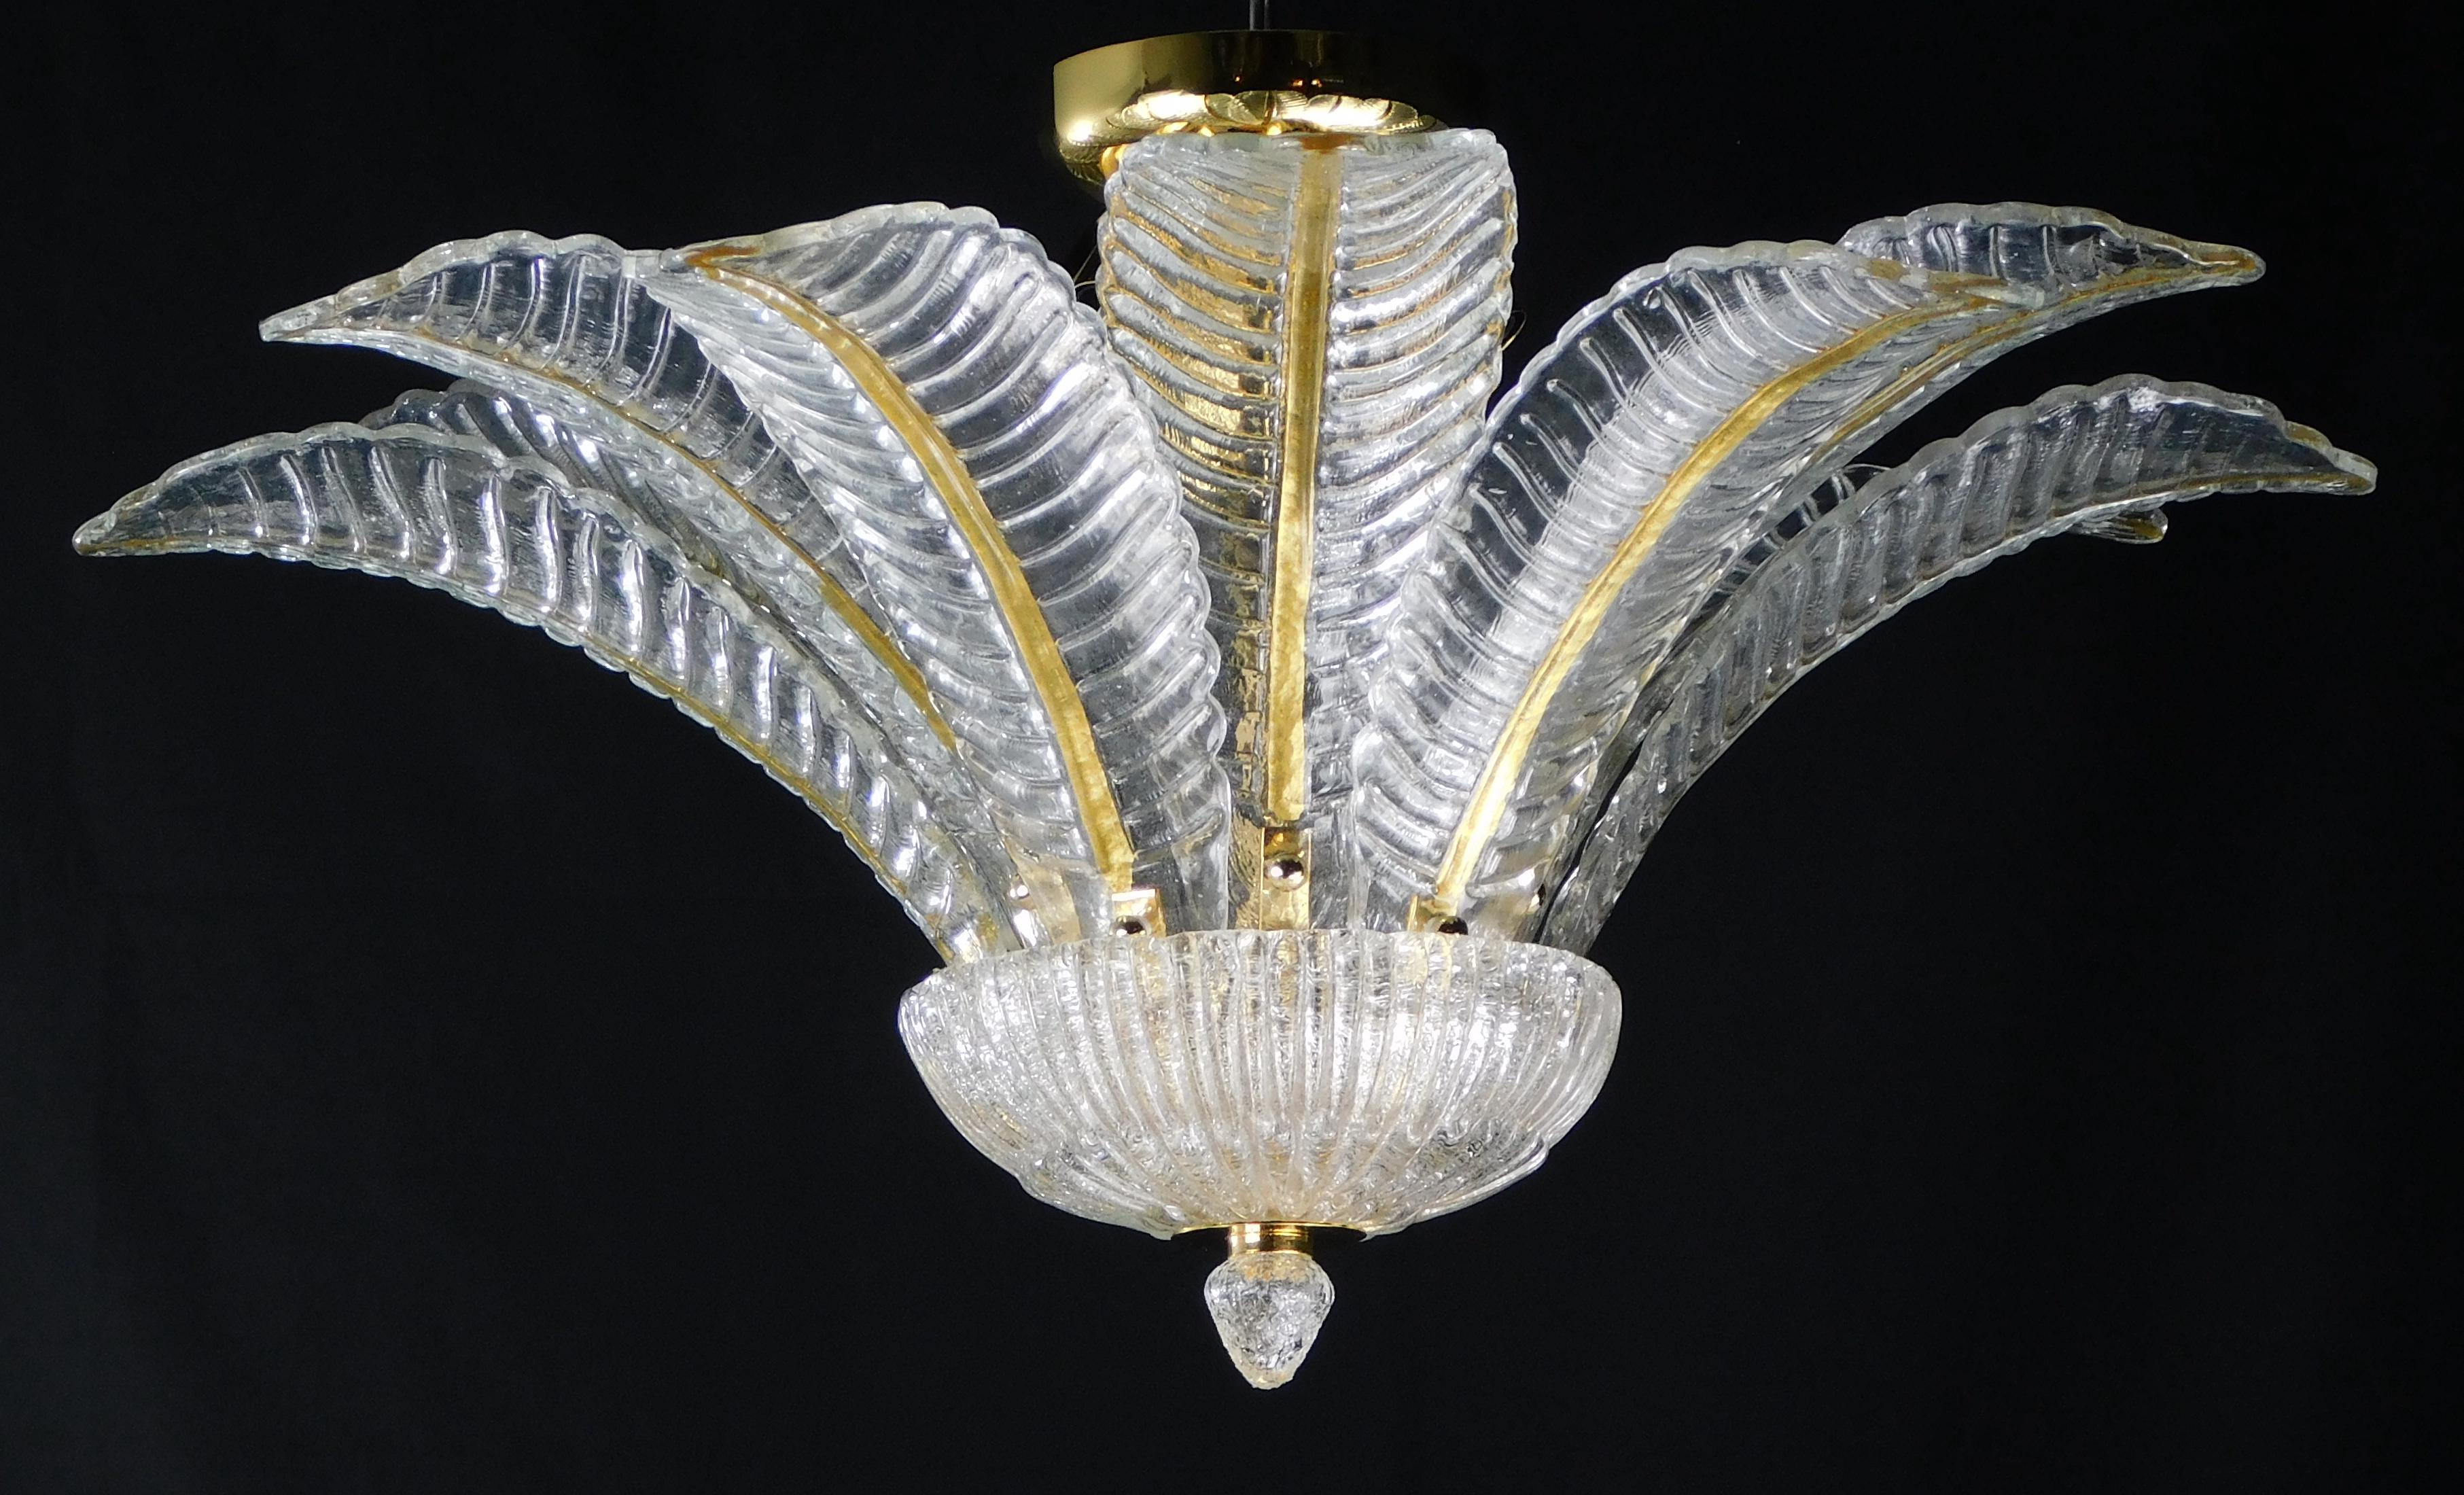 Italian flush mount with clear hand blown Murano Felci fern glass leaves infused with gold, mounted on 24 k gold finish metal frame by Fabio Ltd / Made in Italy
6 lights / E12 or E14 type / max 40W each
Measures: Diameter 27.5 inches, height 14